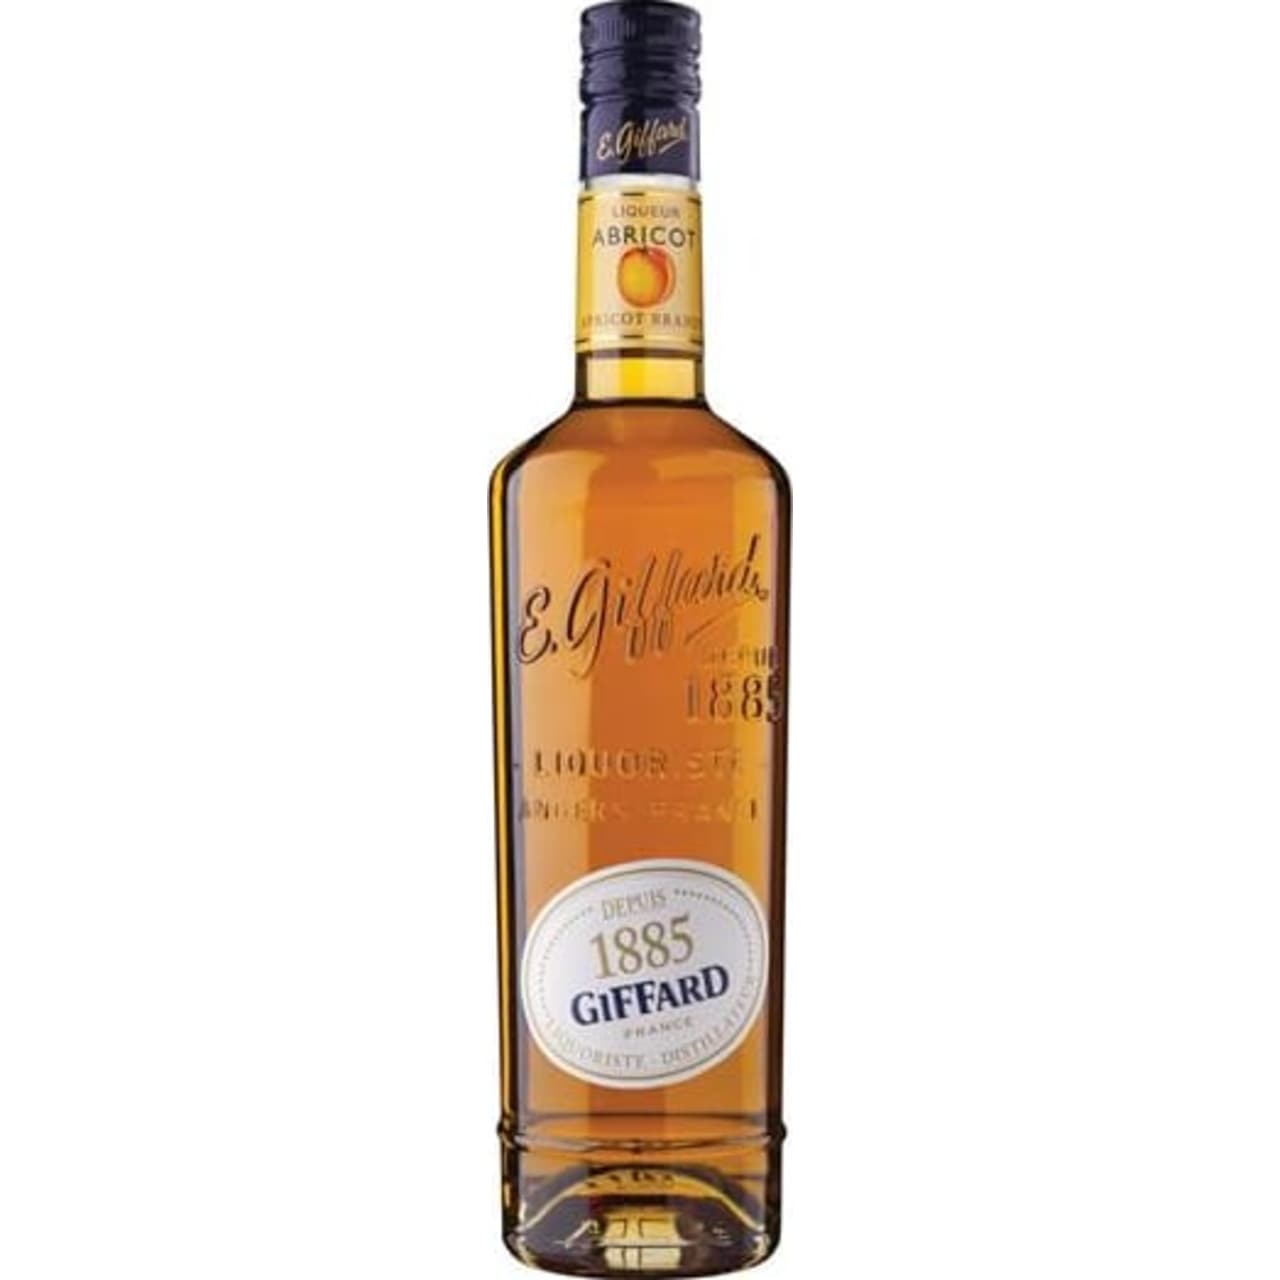 The sweetness of very ripe apricot, with a vegetal touch and sweet spices in the finish.